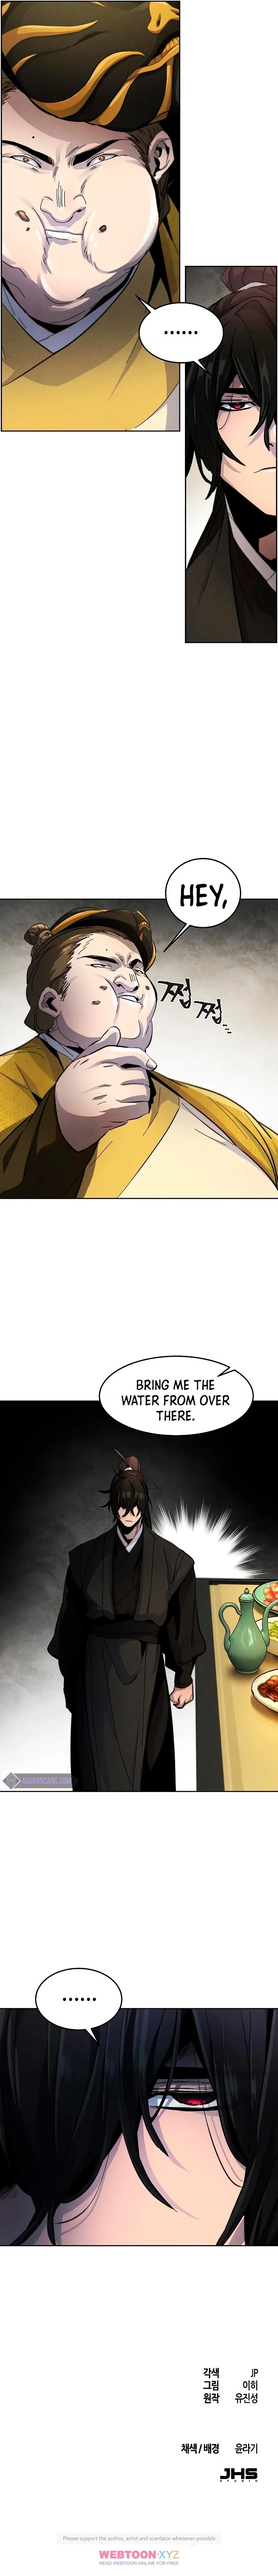 the-return-of-the-crazy-demon-chap-33-7